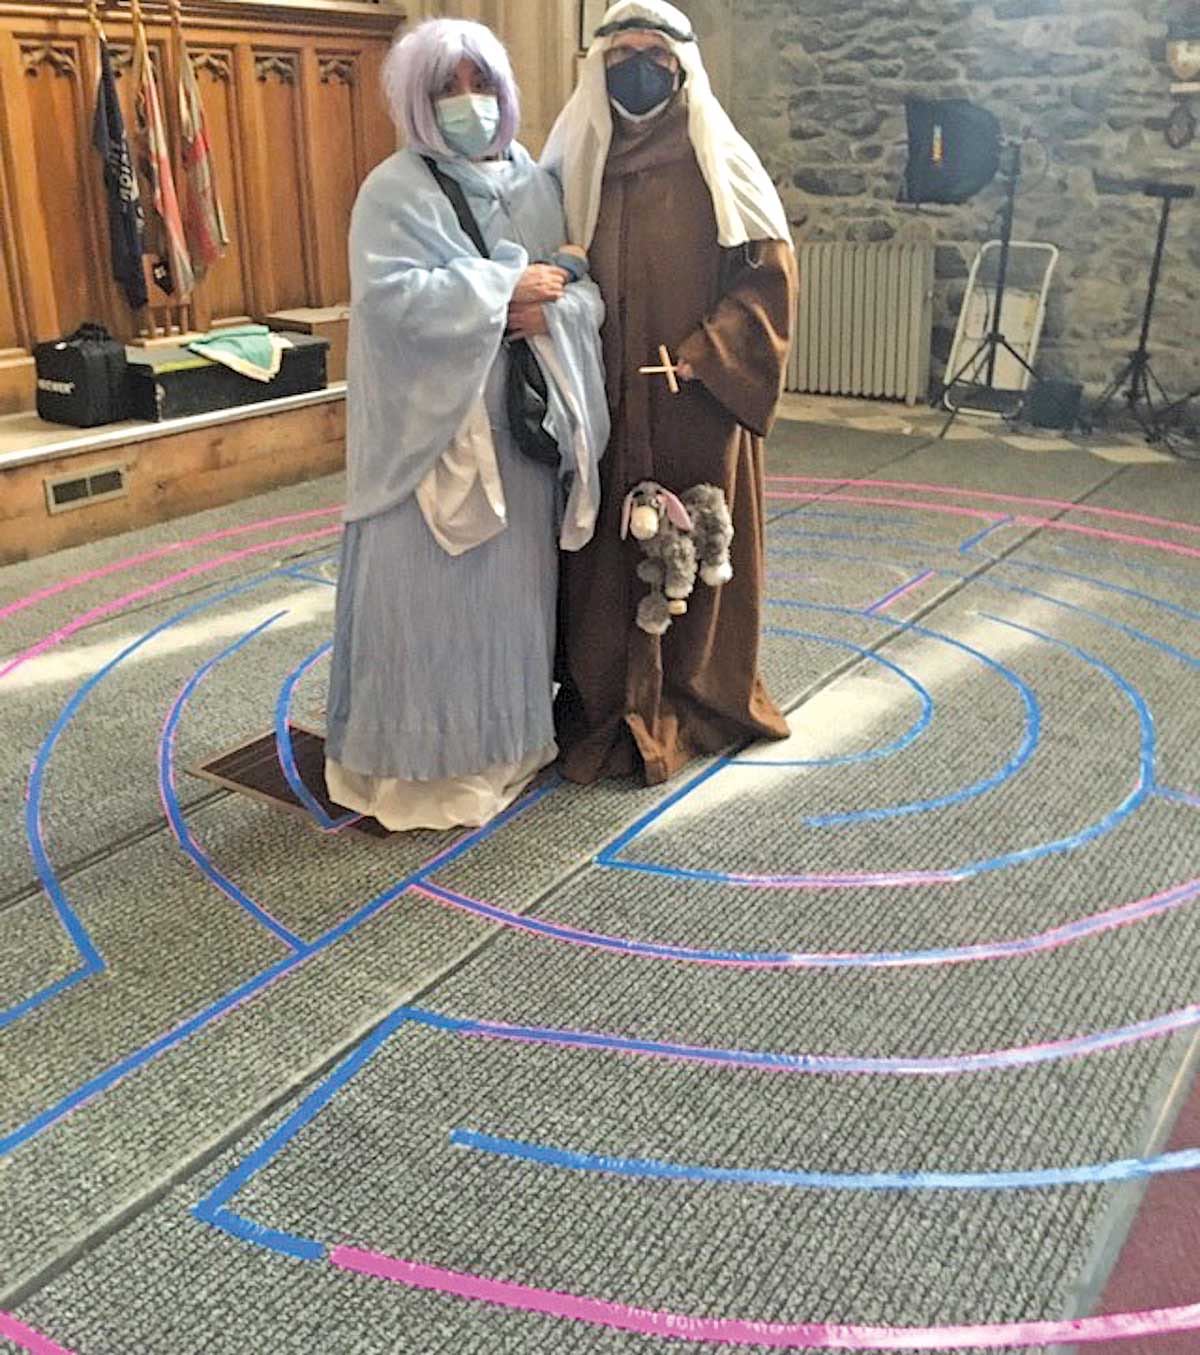 This labyrith has been tempararily installed in the cathedral with the intention of being a place of mindfulness and meditation; it was espeically an important tool during the season of Advent. Mary and Joseph (and their donkey) took time to visit it on the day of the live nativity.